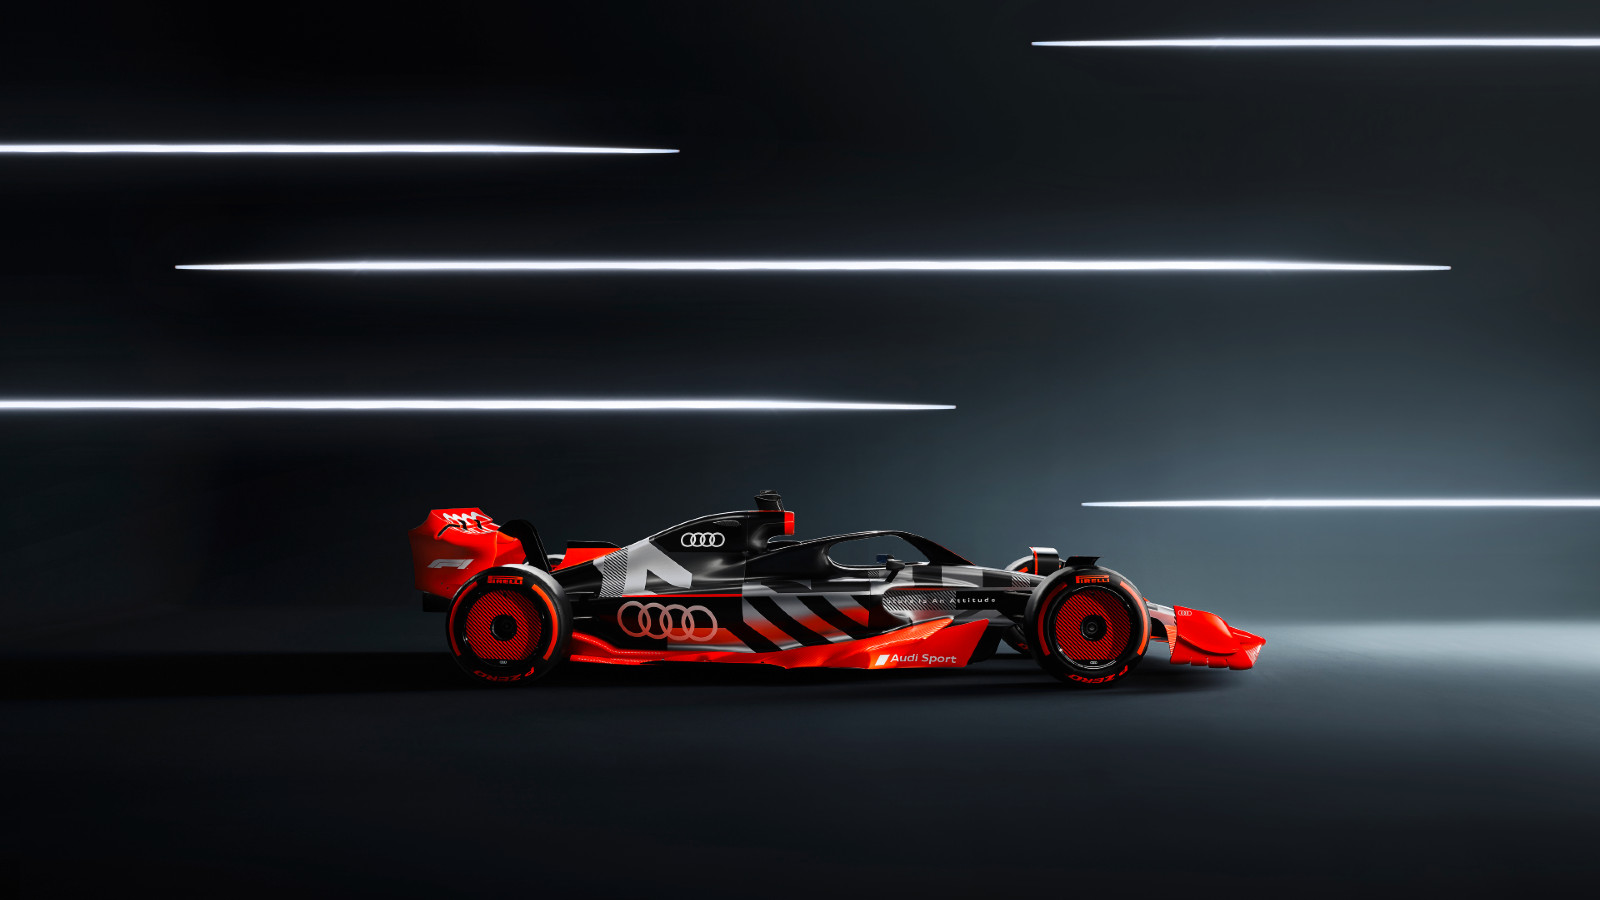 Audi F1 reveal the first driver to join their Formula 1 project ahead